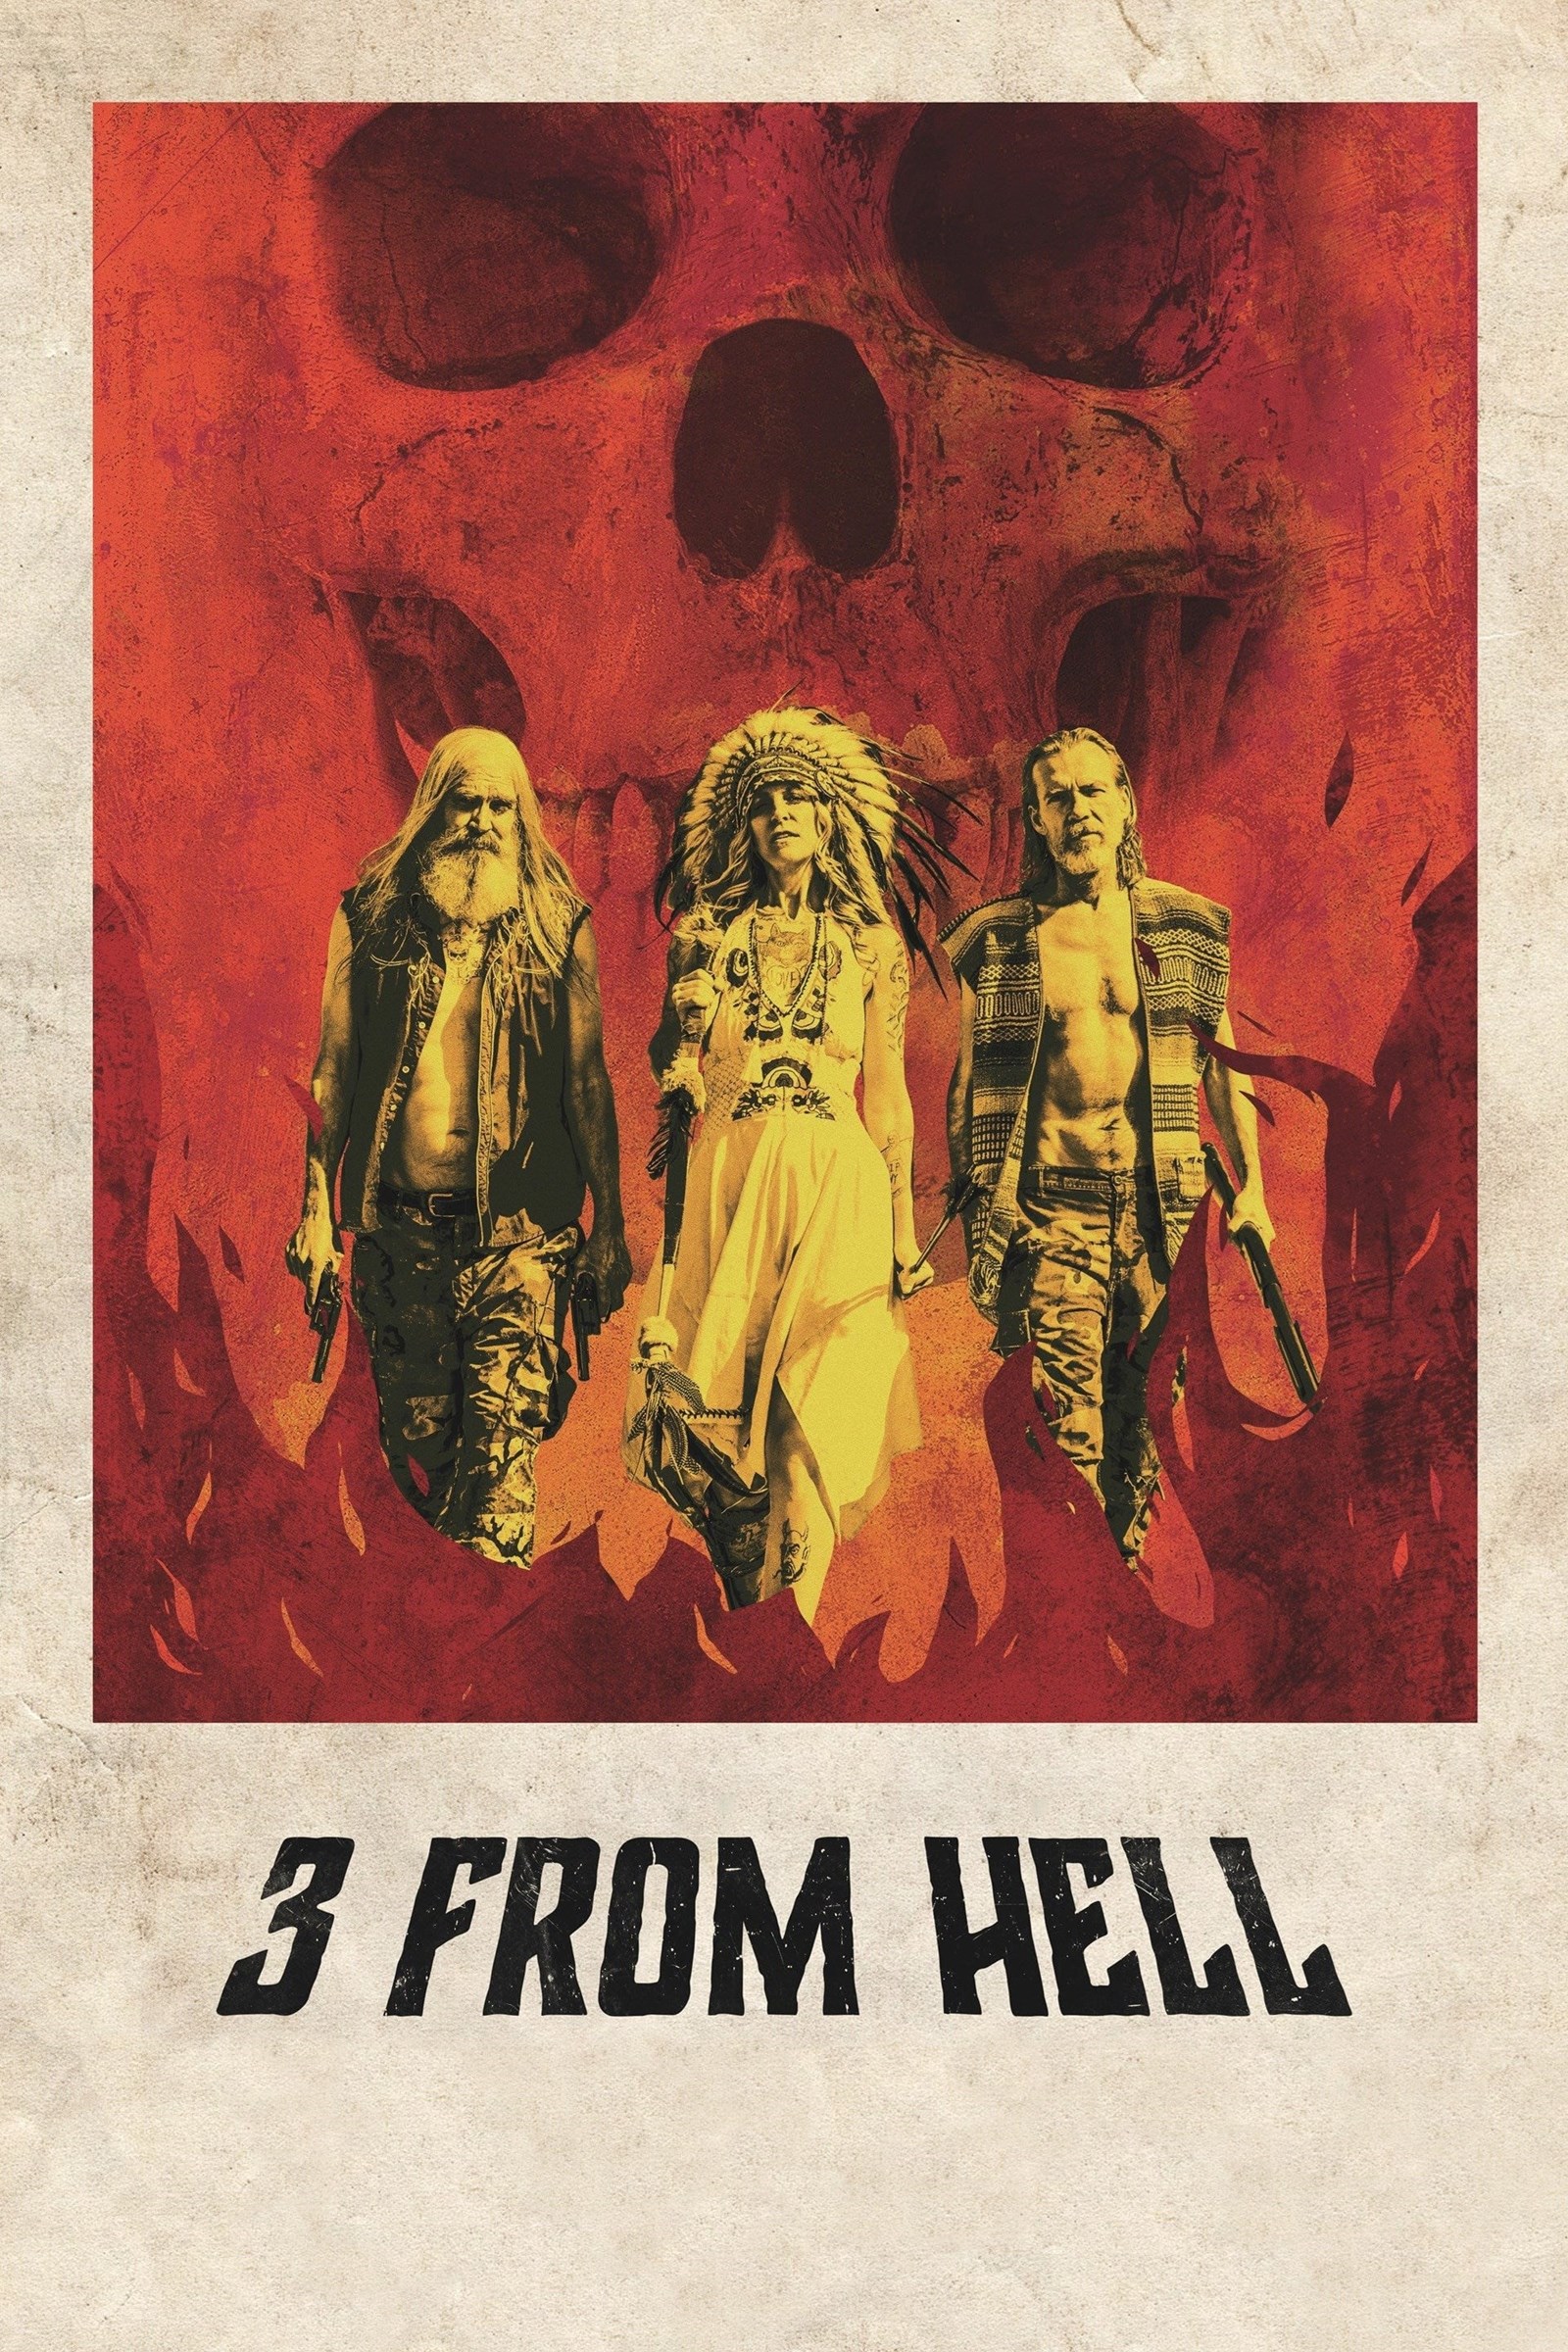 3 from hell.165197